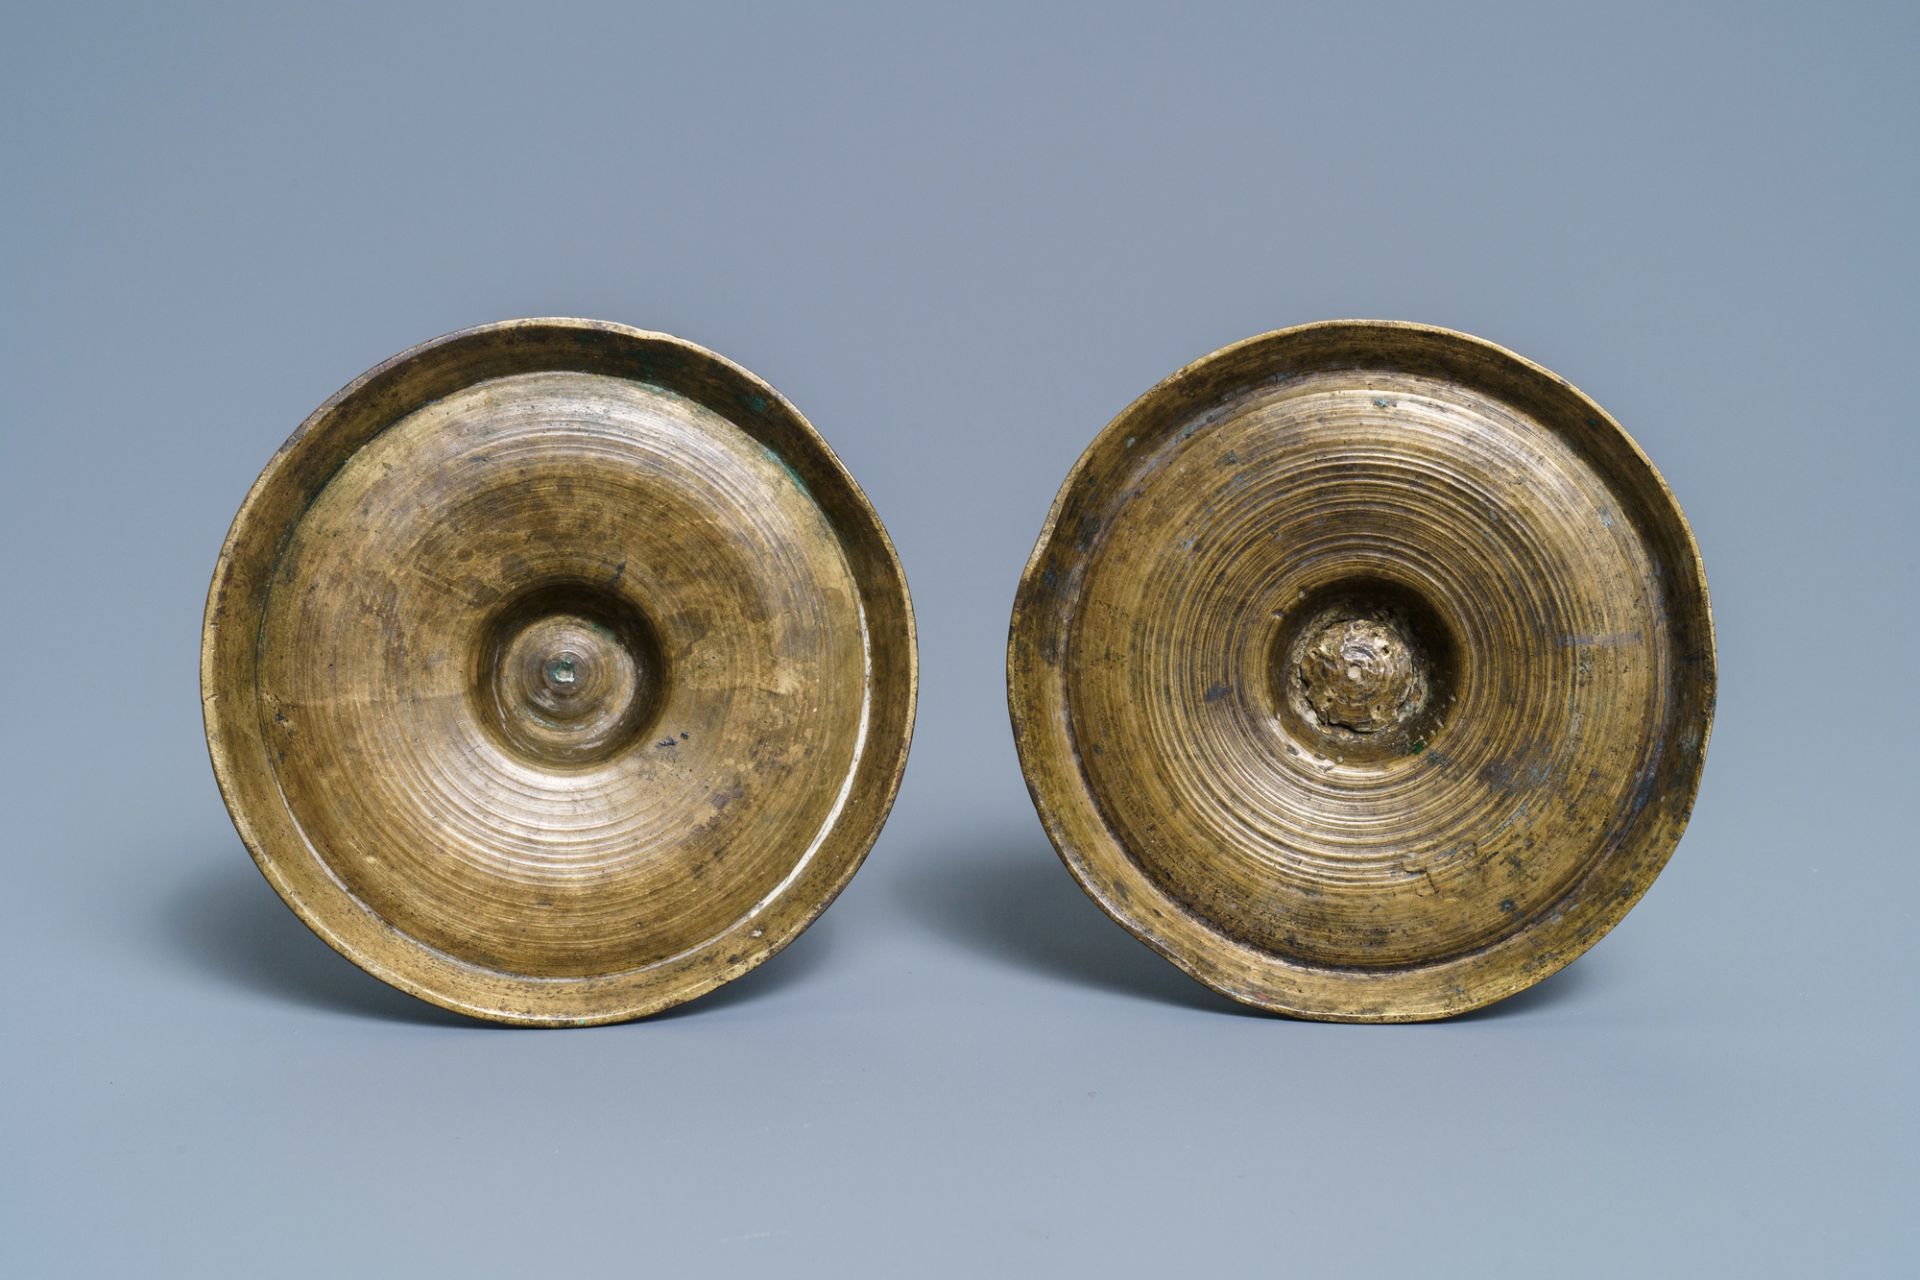 A pair of French bronze candlesticks, 2nd half 16th C. - Image 7 of 7